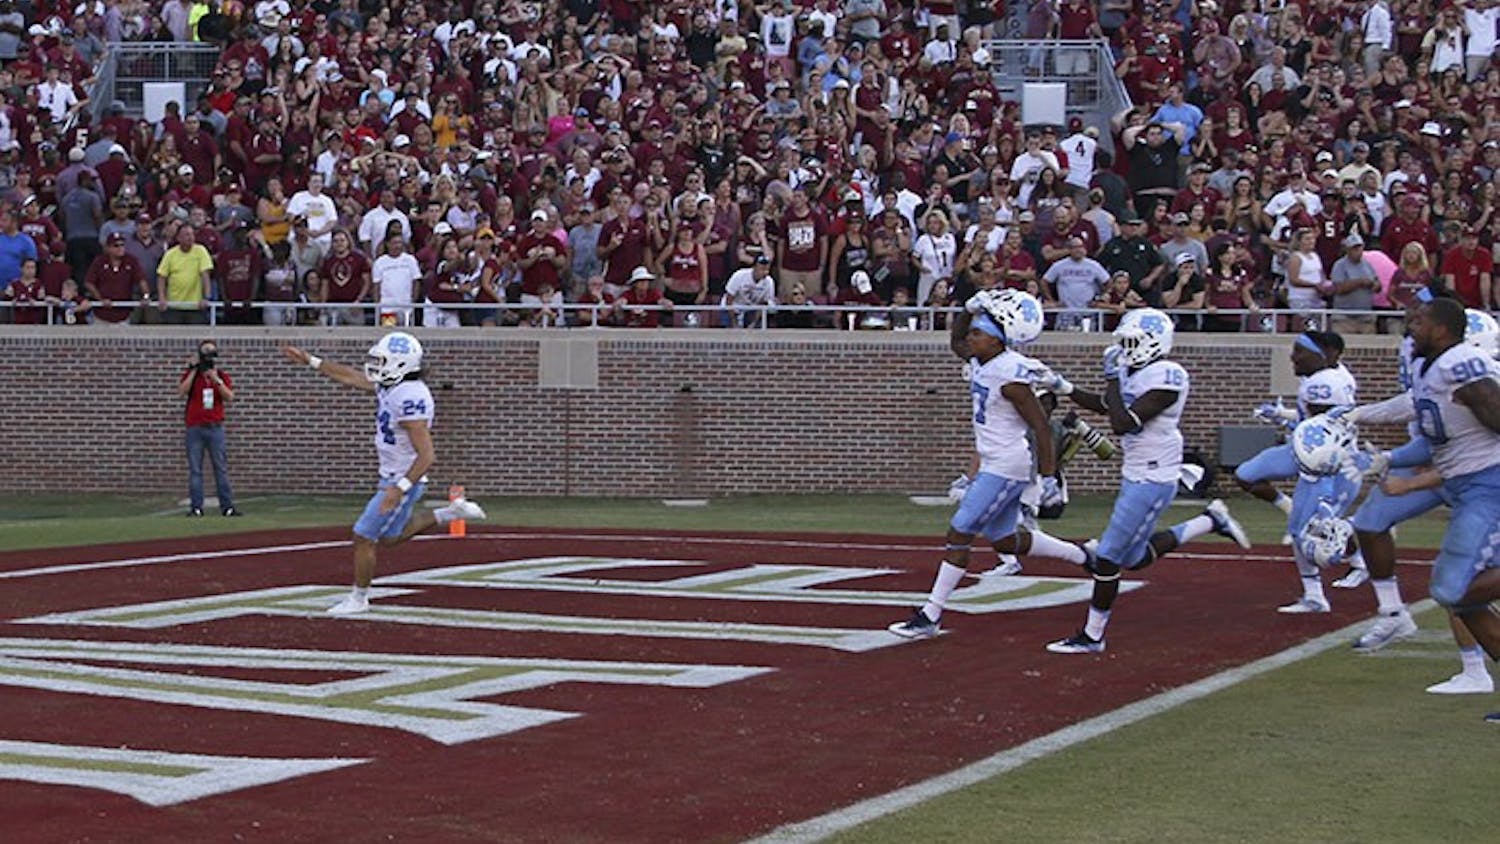 UNC kicker Nick Weiler (24) imitates the Florida State "Tomahawk Chop" as he celebrates kicking a career high 54-yard field goal as time expired to lift UNC over Florida State.